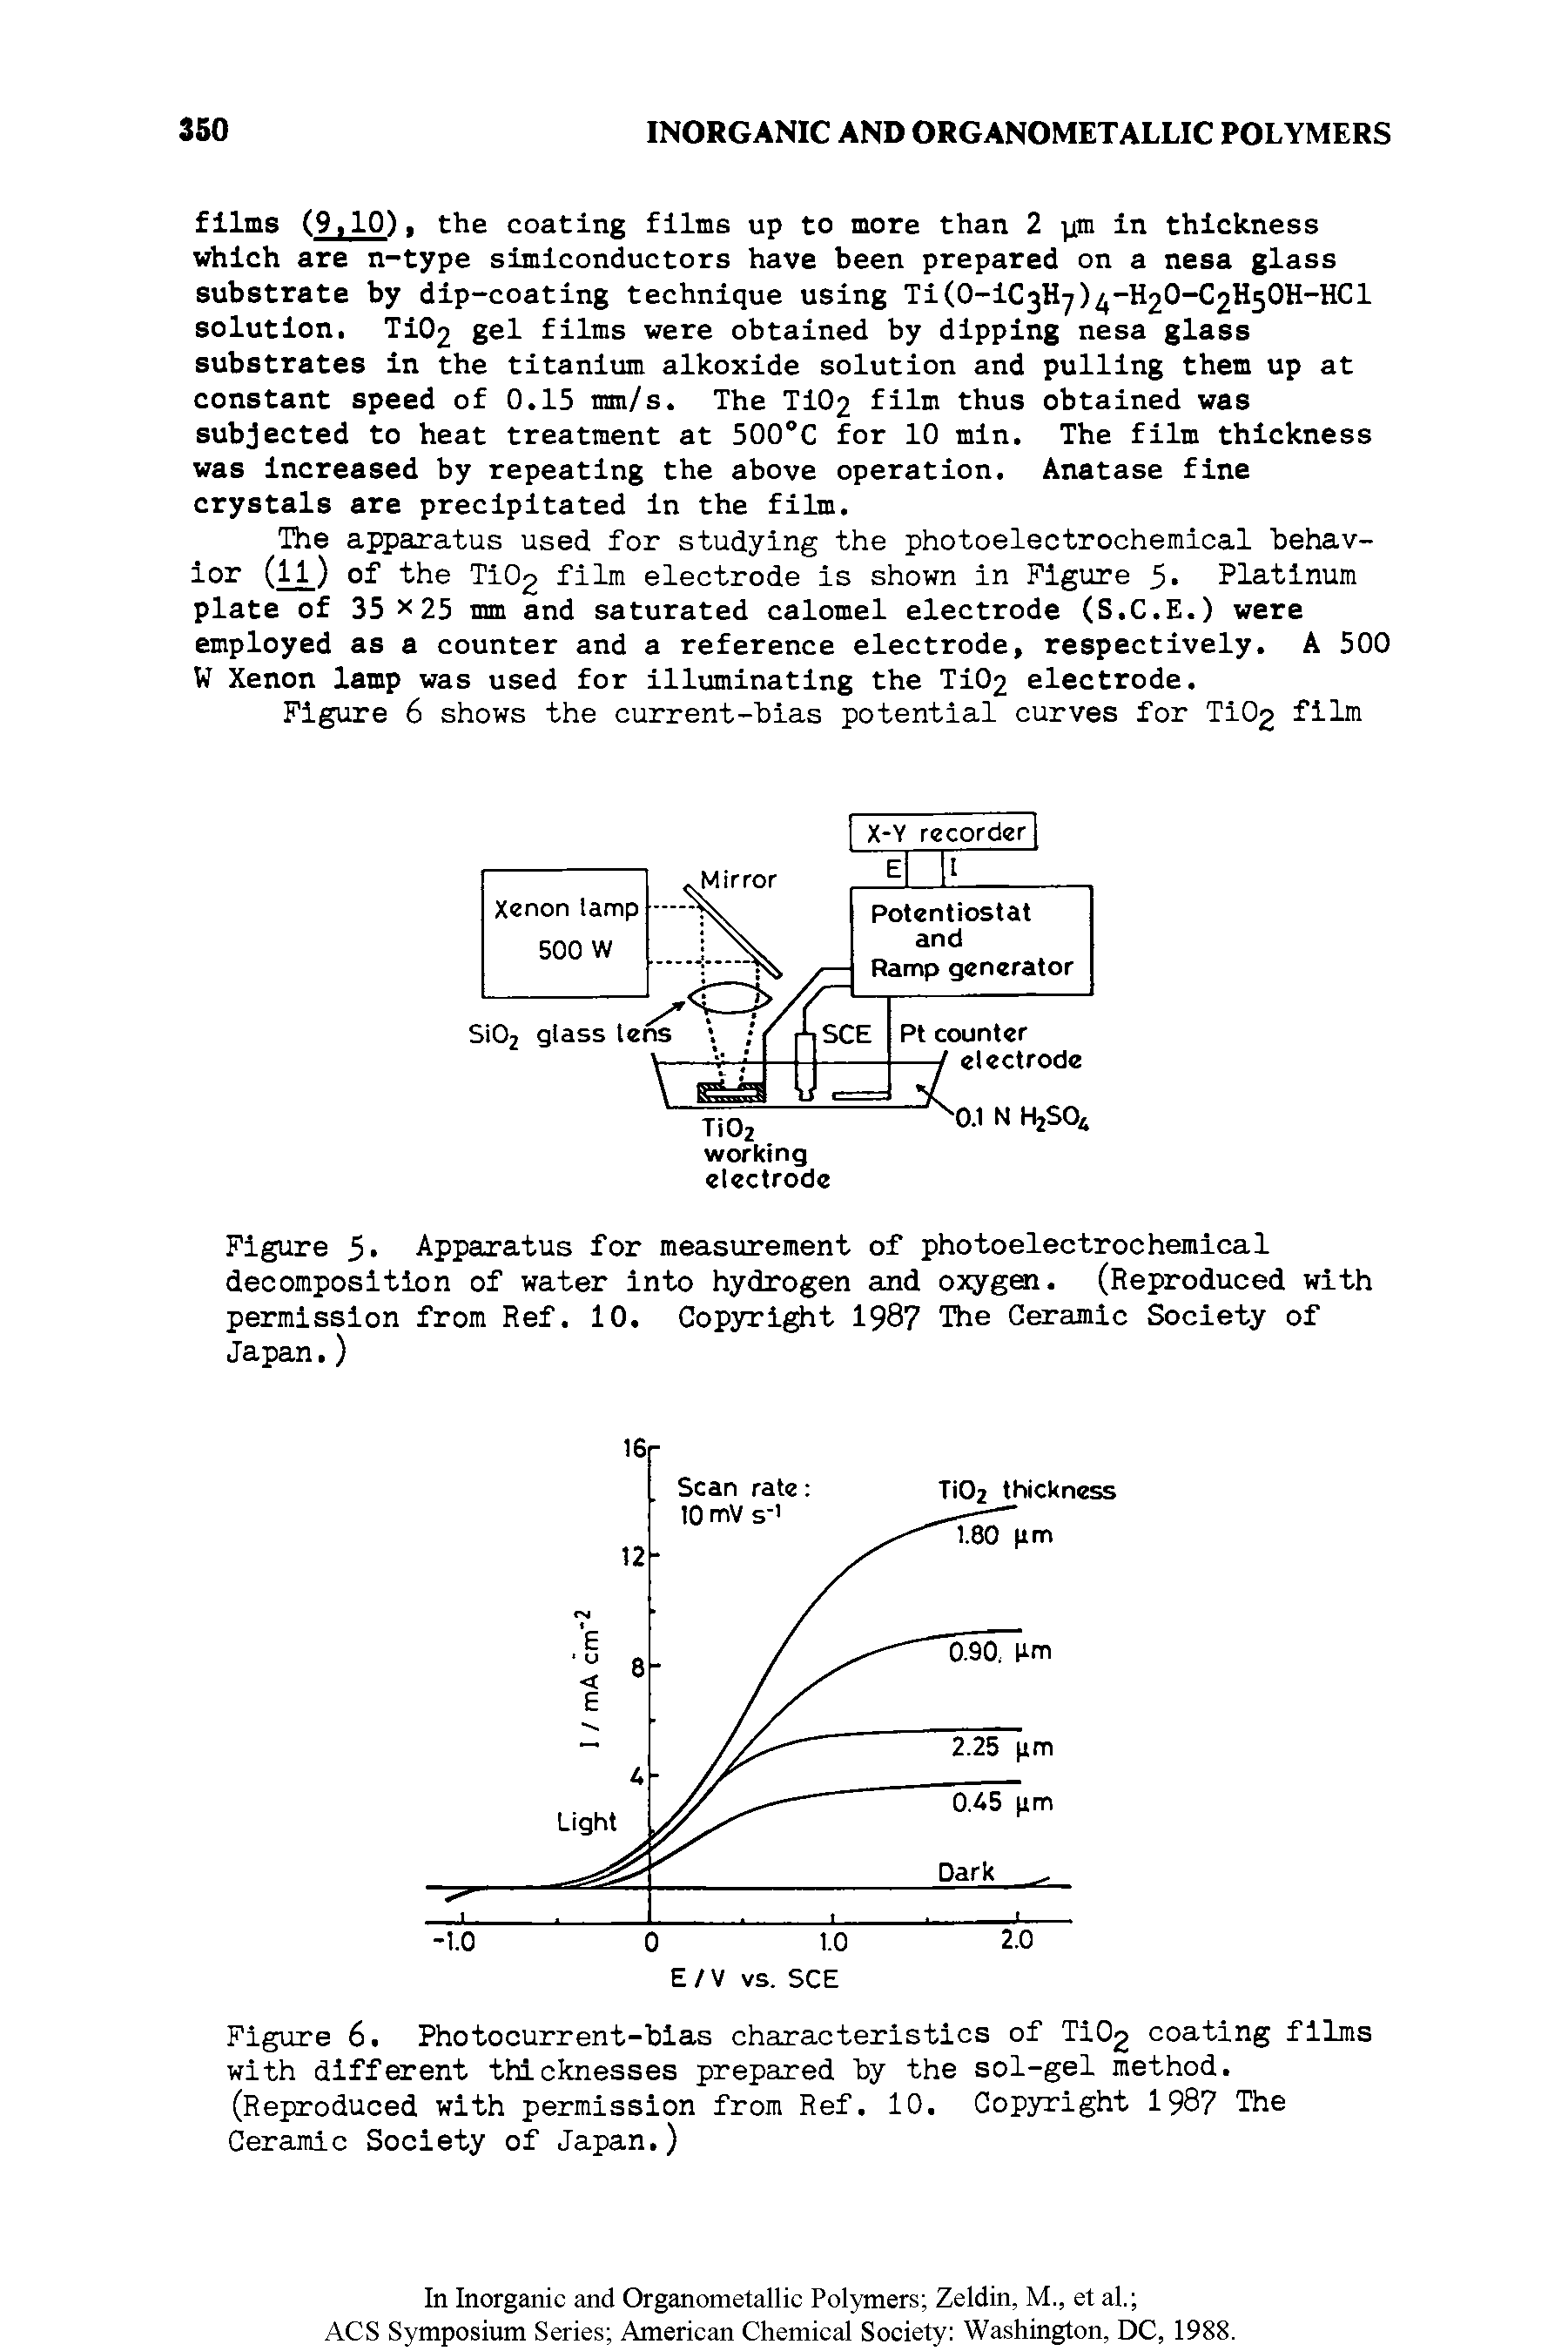 Figure 5 Apparatus for measurement of photoelectrochemical decomposition of water into hydrogen and oxygen. (Reproduced with permission from Ref. 10. Copyright 1987 The Ceramic Society of Japan.)...